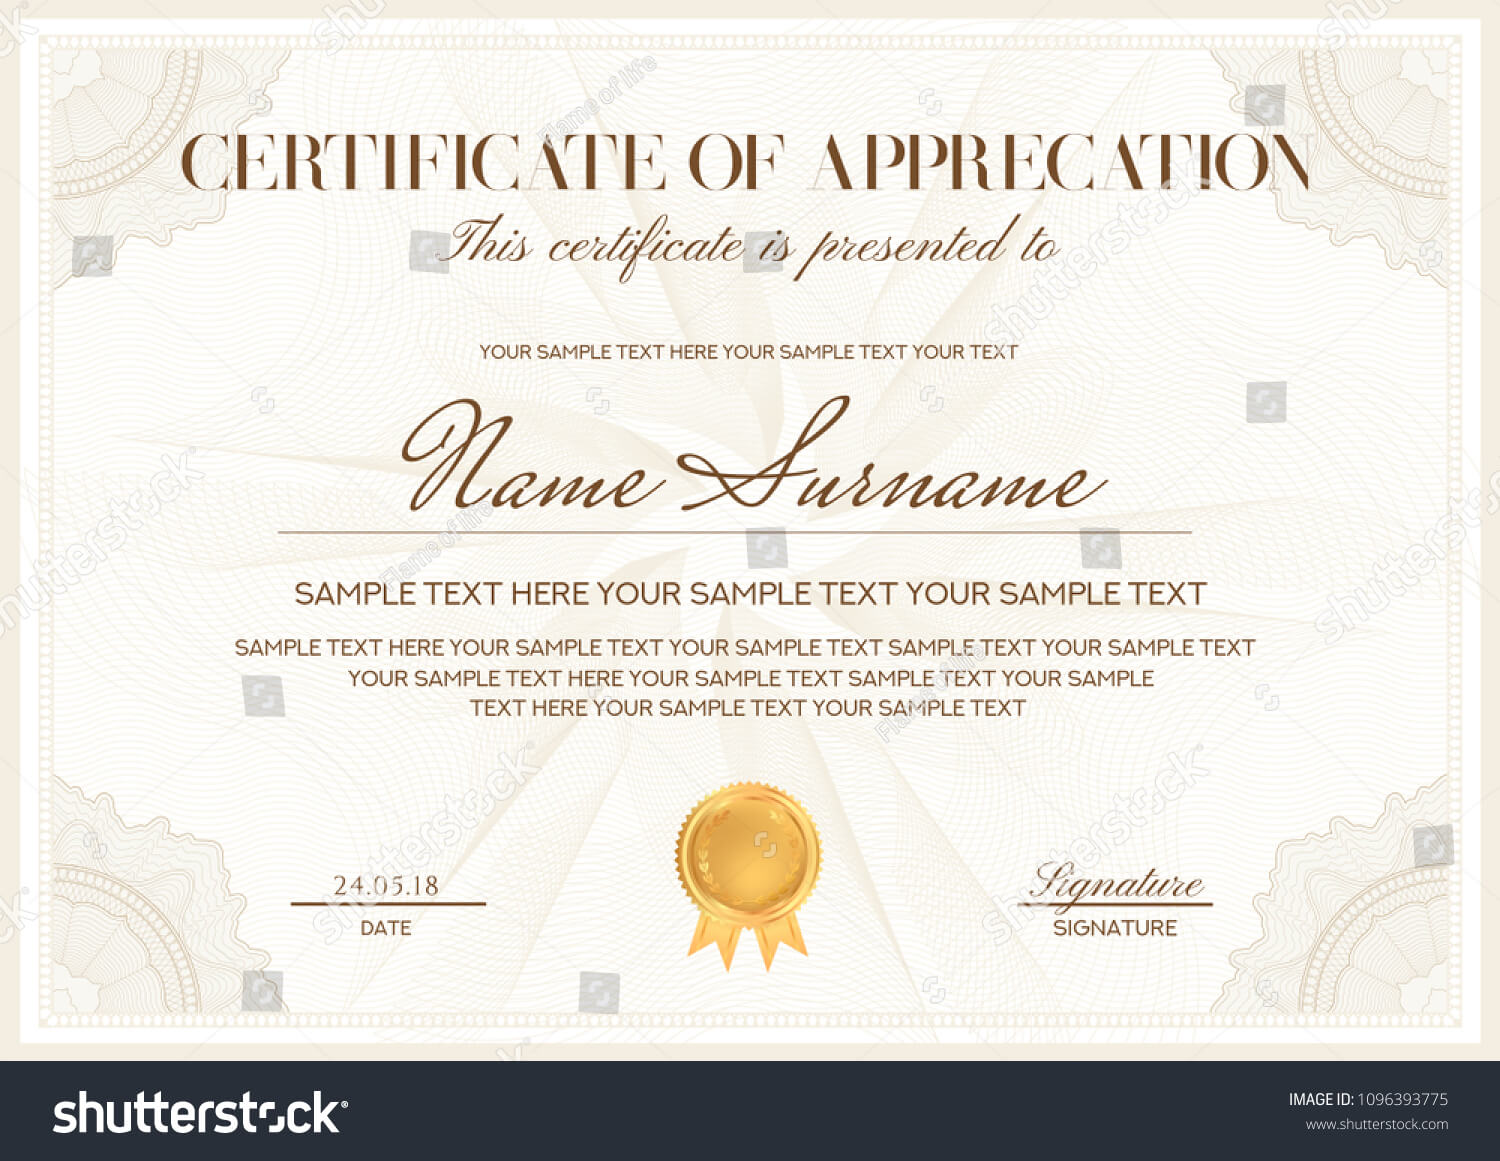 Certificate Template Printable Editable Design Diploma Stock Intended For Blank Certificate Of Achievement Template